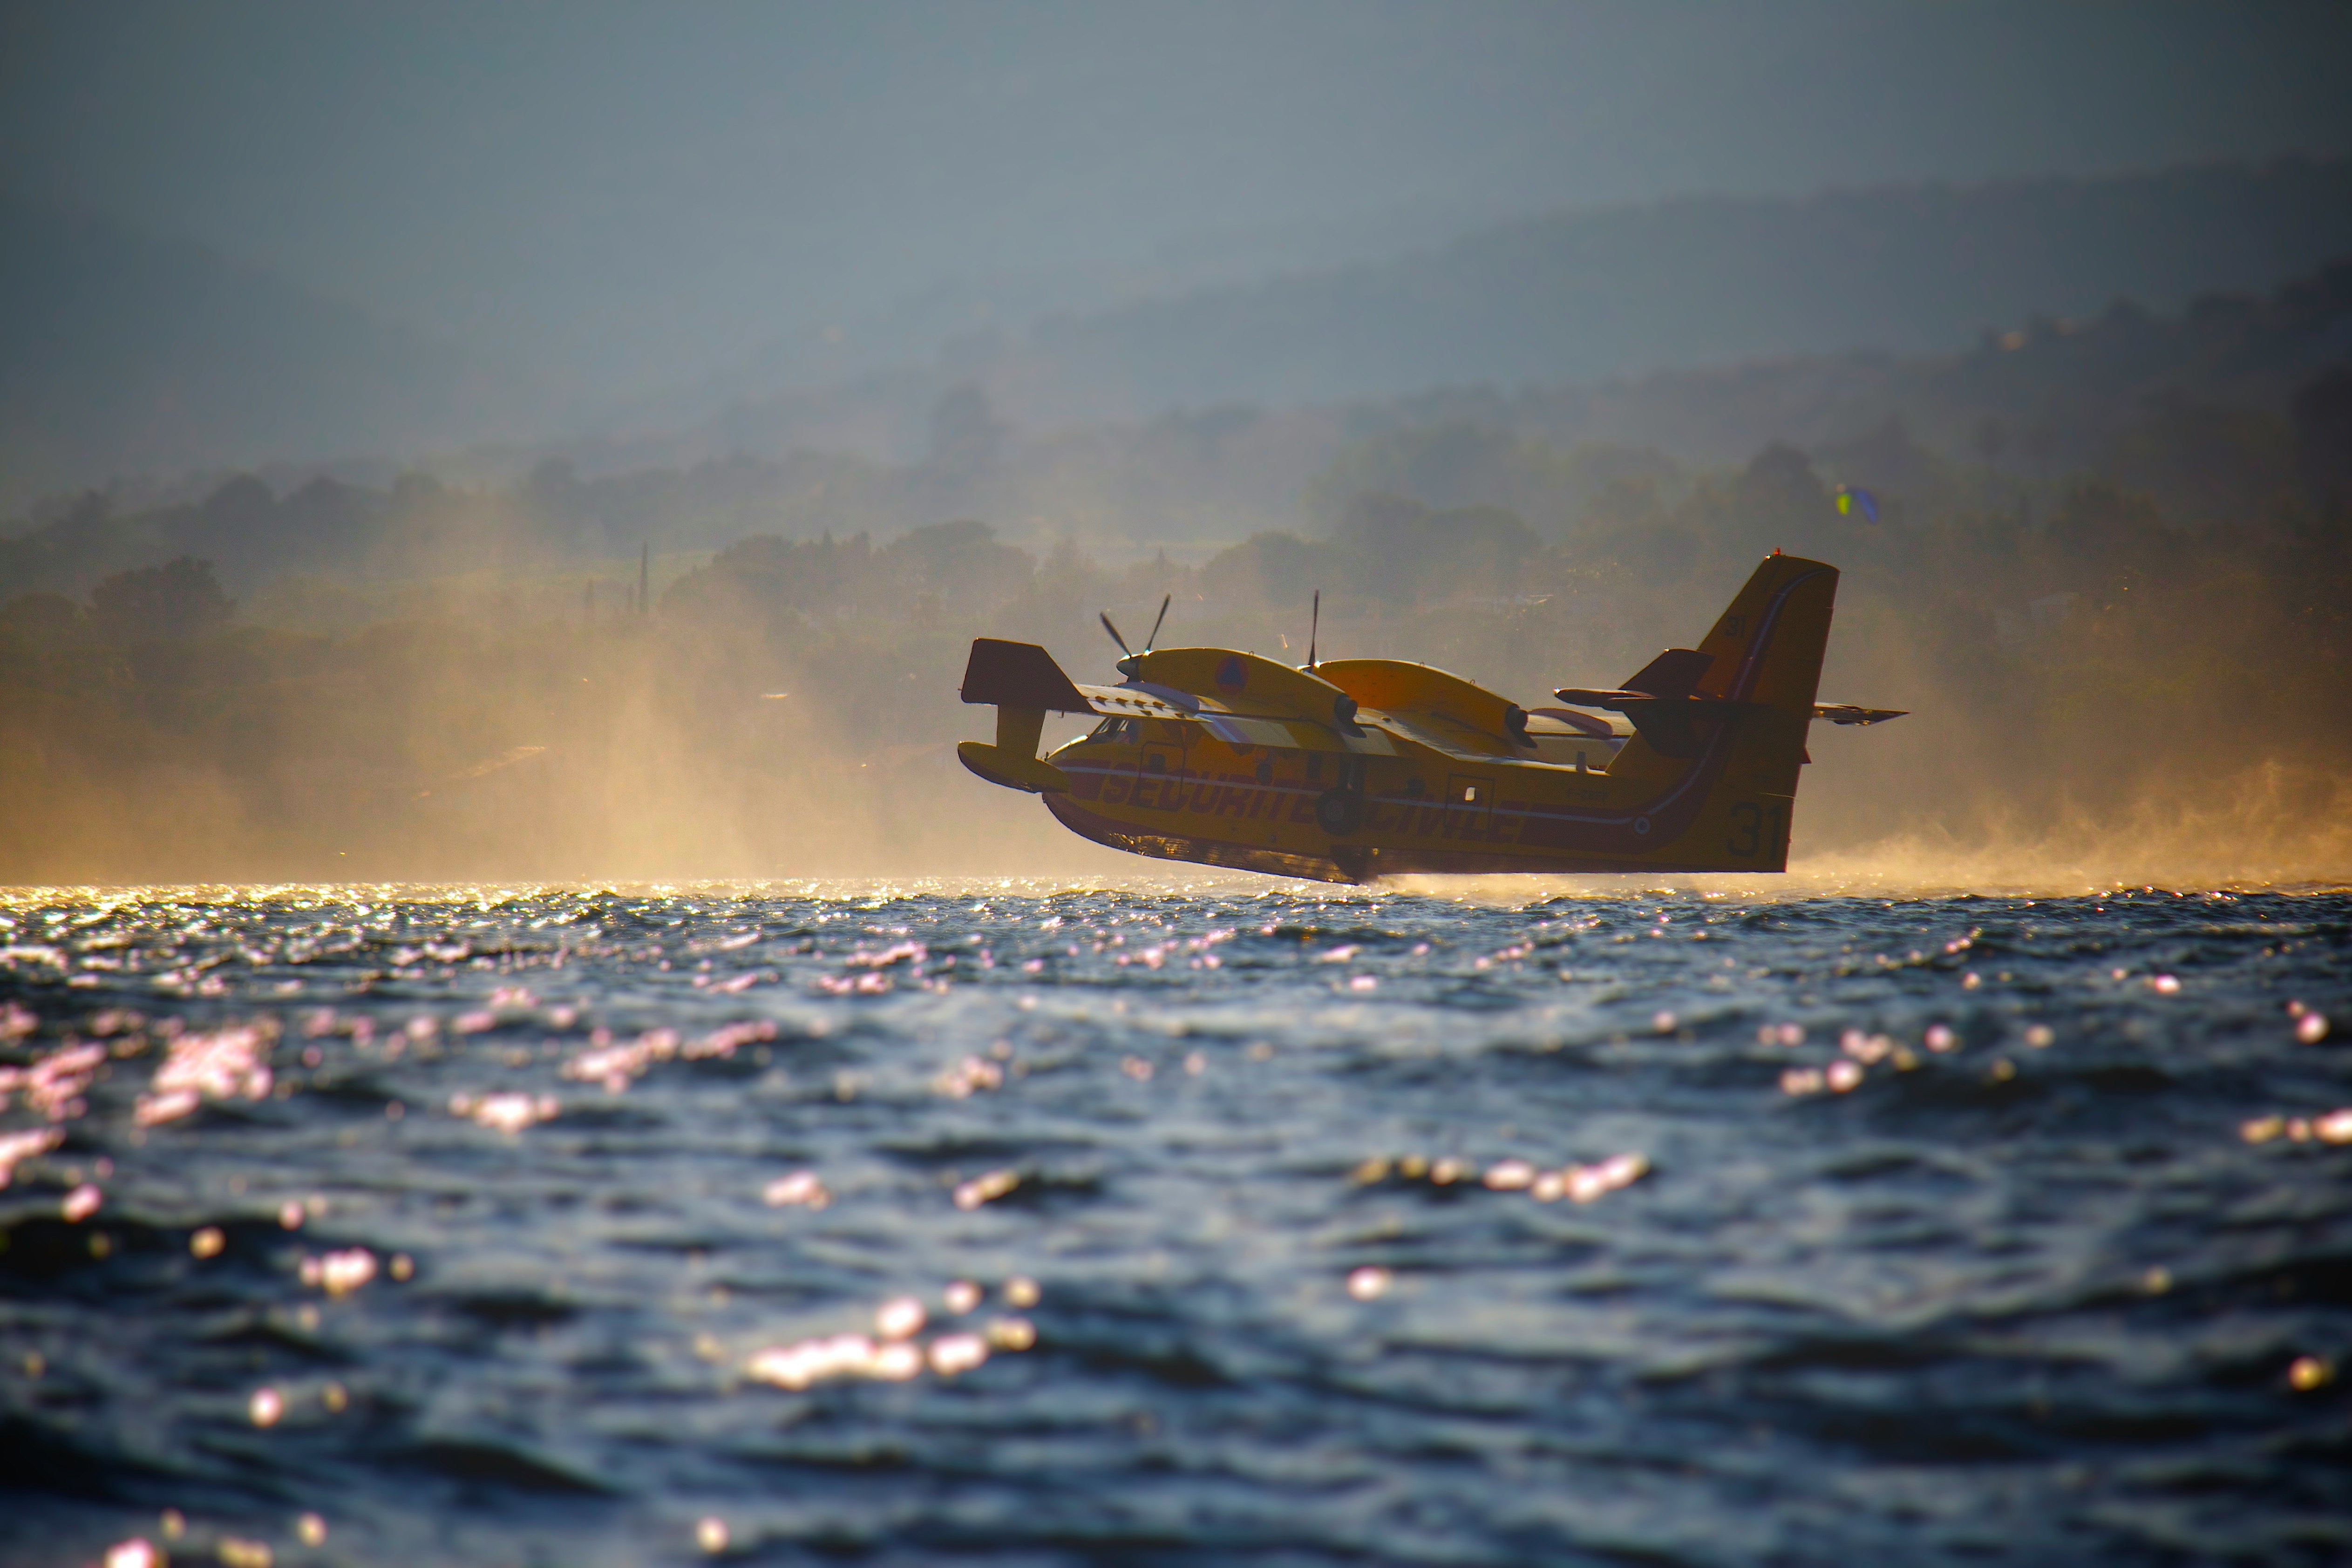 low angle photography of amphibian plane flying at low altitude near water at daytime